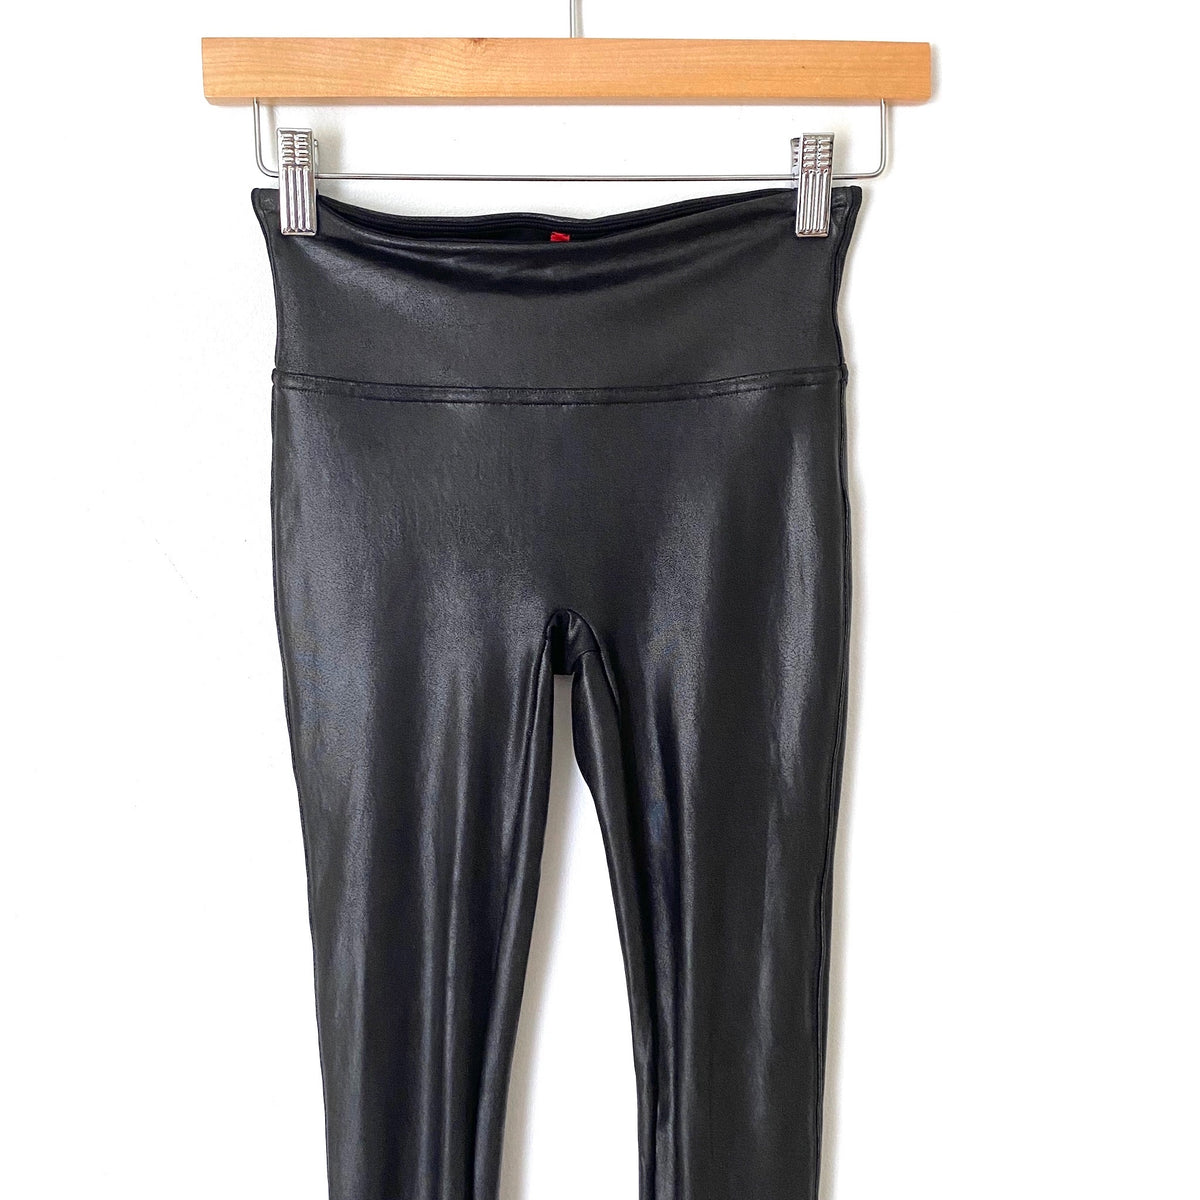 Spanx Black Faux Leather Leggings- Size XS (Inseam 28”) – The